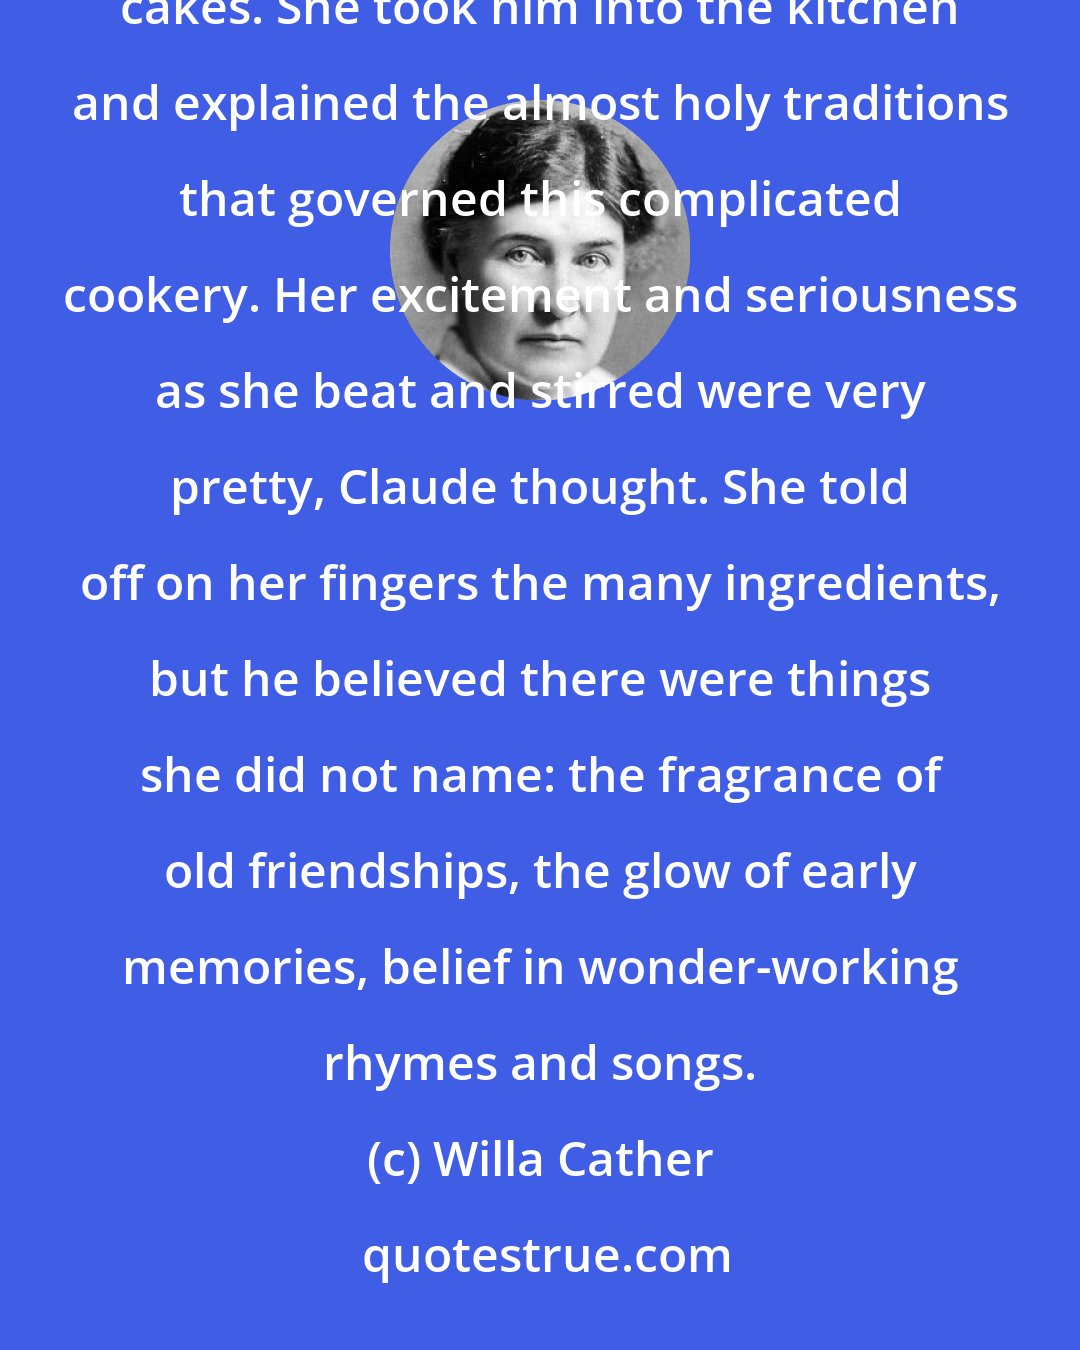 Willa Cather: He had been to see Mrs. Erlich just before starting home for the holidays, and found her making German Christmas cakes. She took him into the kitchen and explained the almost holy traditions that governed this complicated cookery. Her excitement and seriousness as she beat and stirred were very pretty, Claude thought. She told off on her fingers the many ingredients, but he believed there were things she did not name: the fragrance of old friendships, the glow of early memories, belief in wonder-working rhymes and songs.